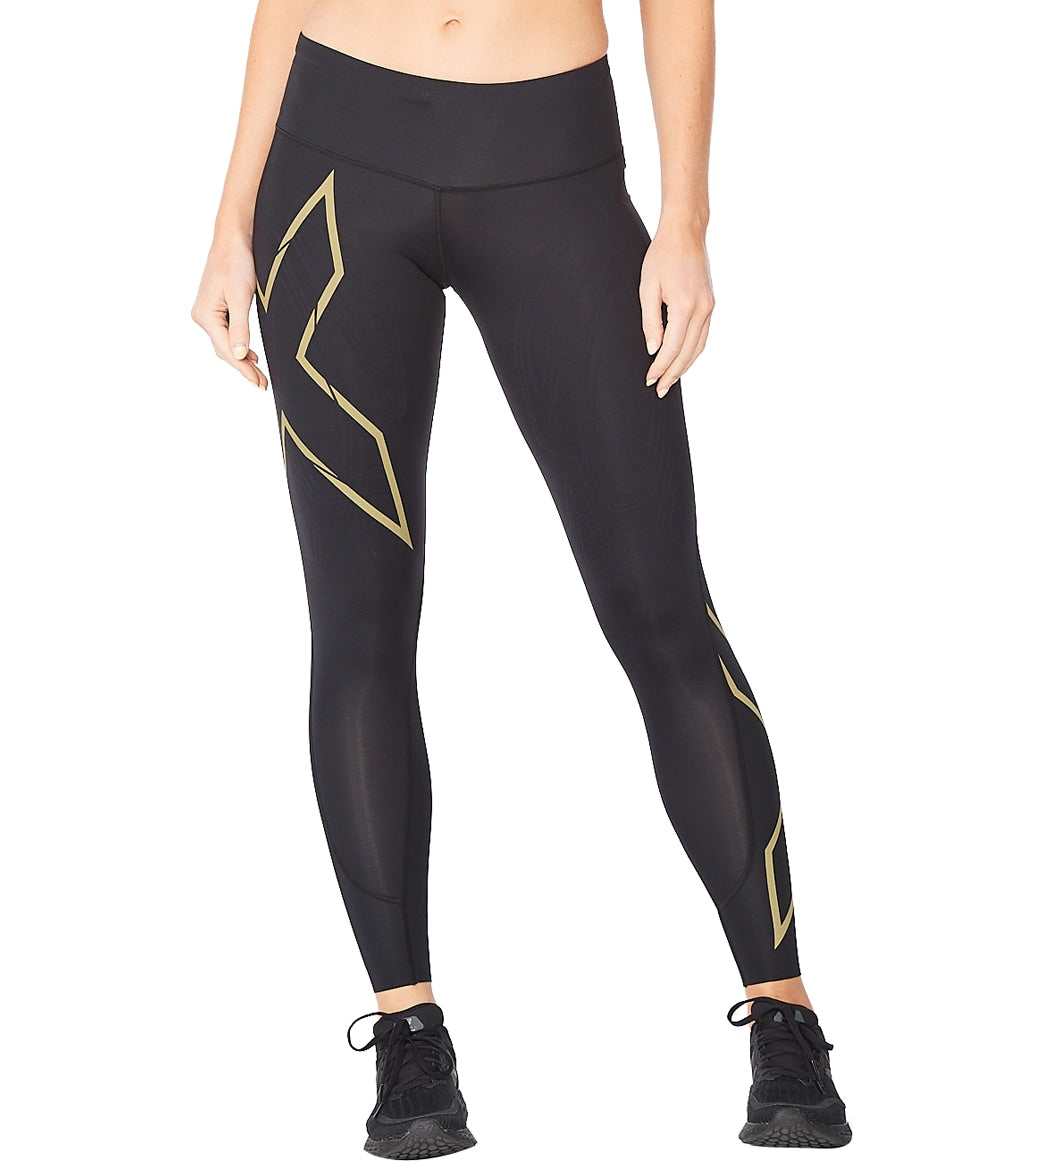 Women's Light Speed Compression Tight at